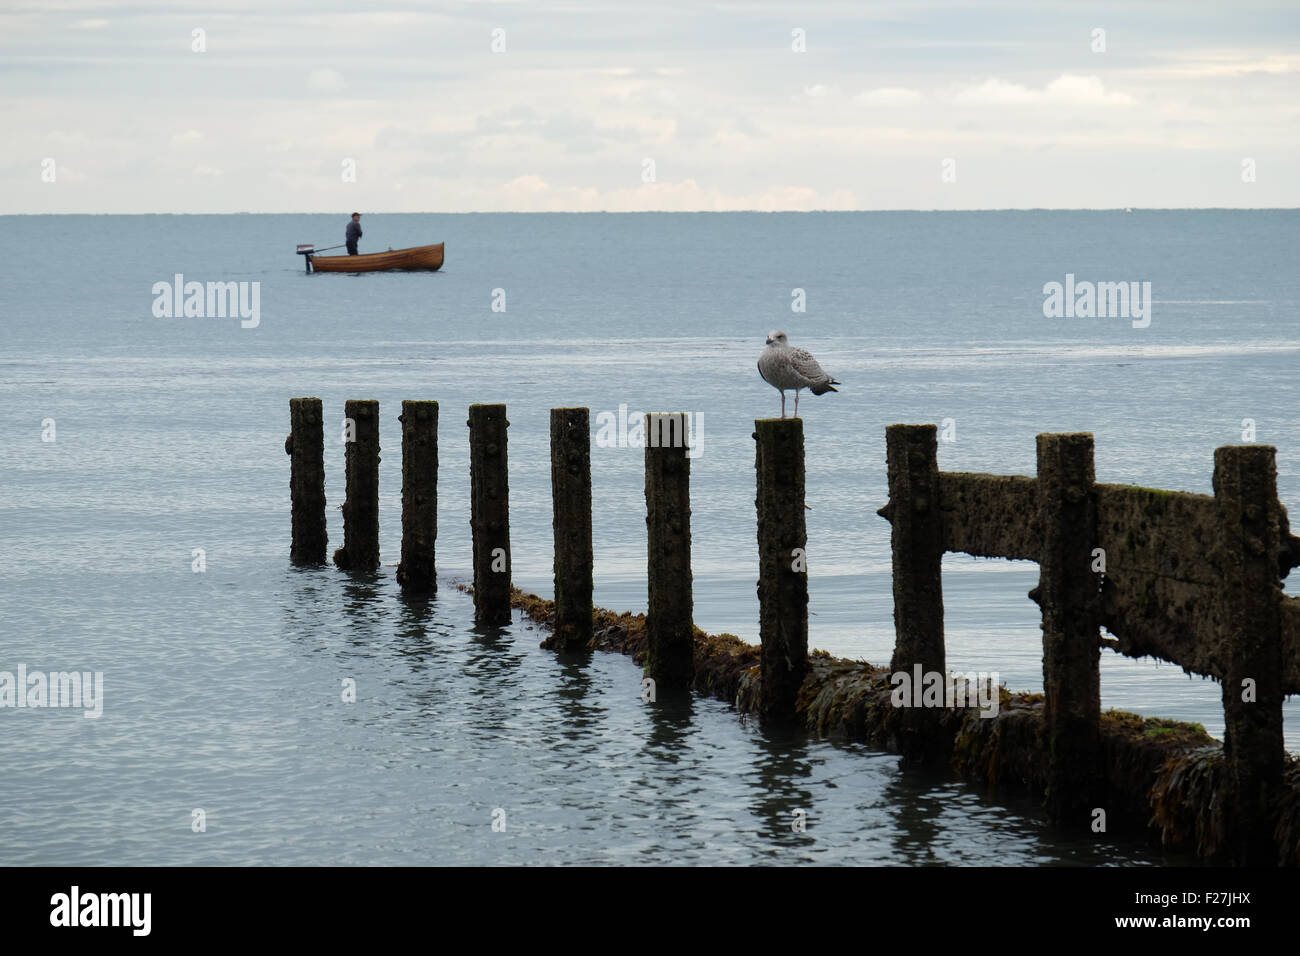 A man in his fishing dinghy in Sandown Bay, Isle of Wight, England Stock Photo